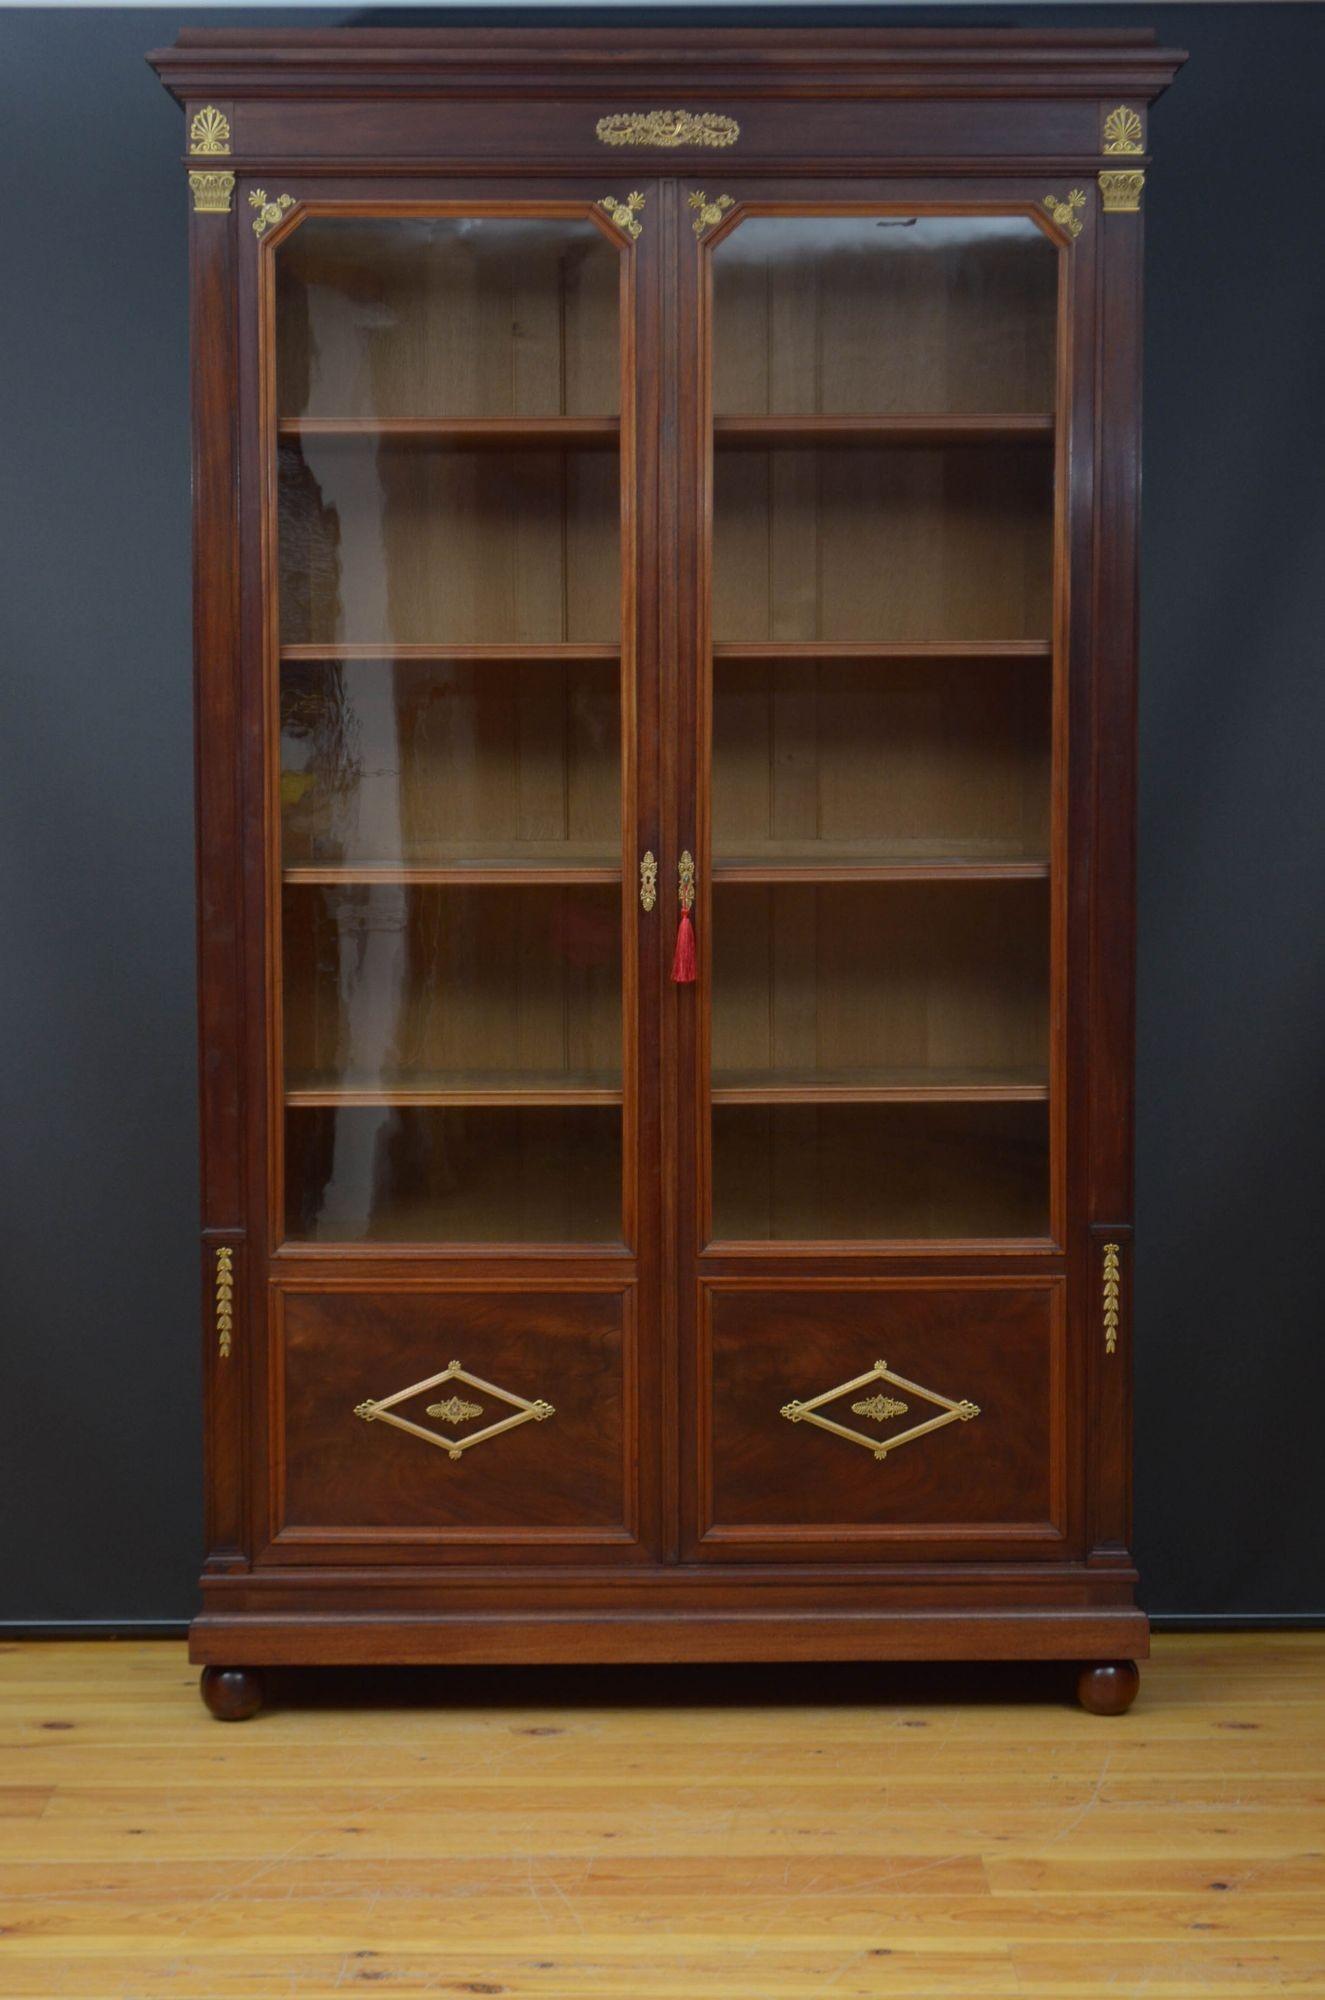 Sn5534 A large XIXth century mahogany glazed bookcase, having cavetto cornice above a shallow frieze and a pair of glazed doors with flamed mahogany panels to the base and fitted with original working lock and enclosing five height adjustable